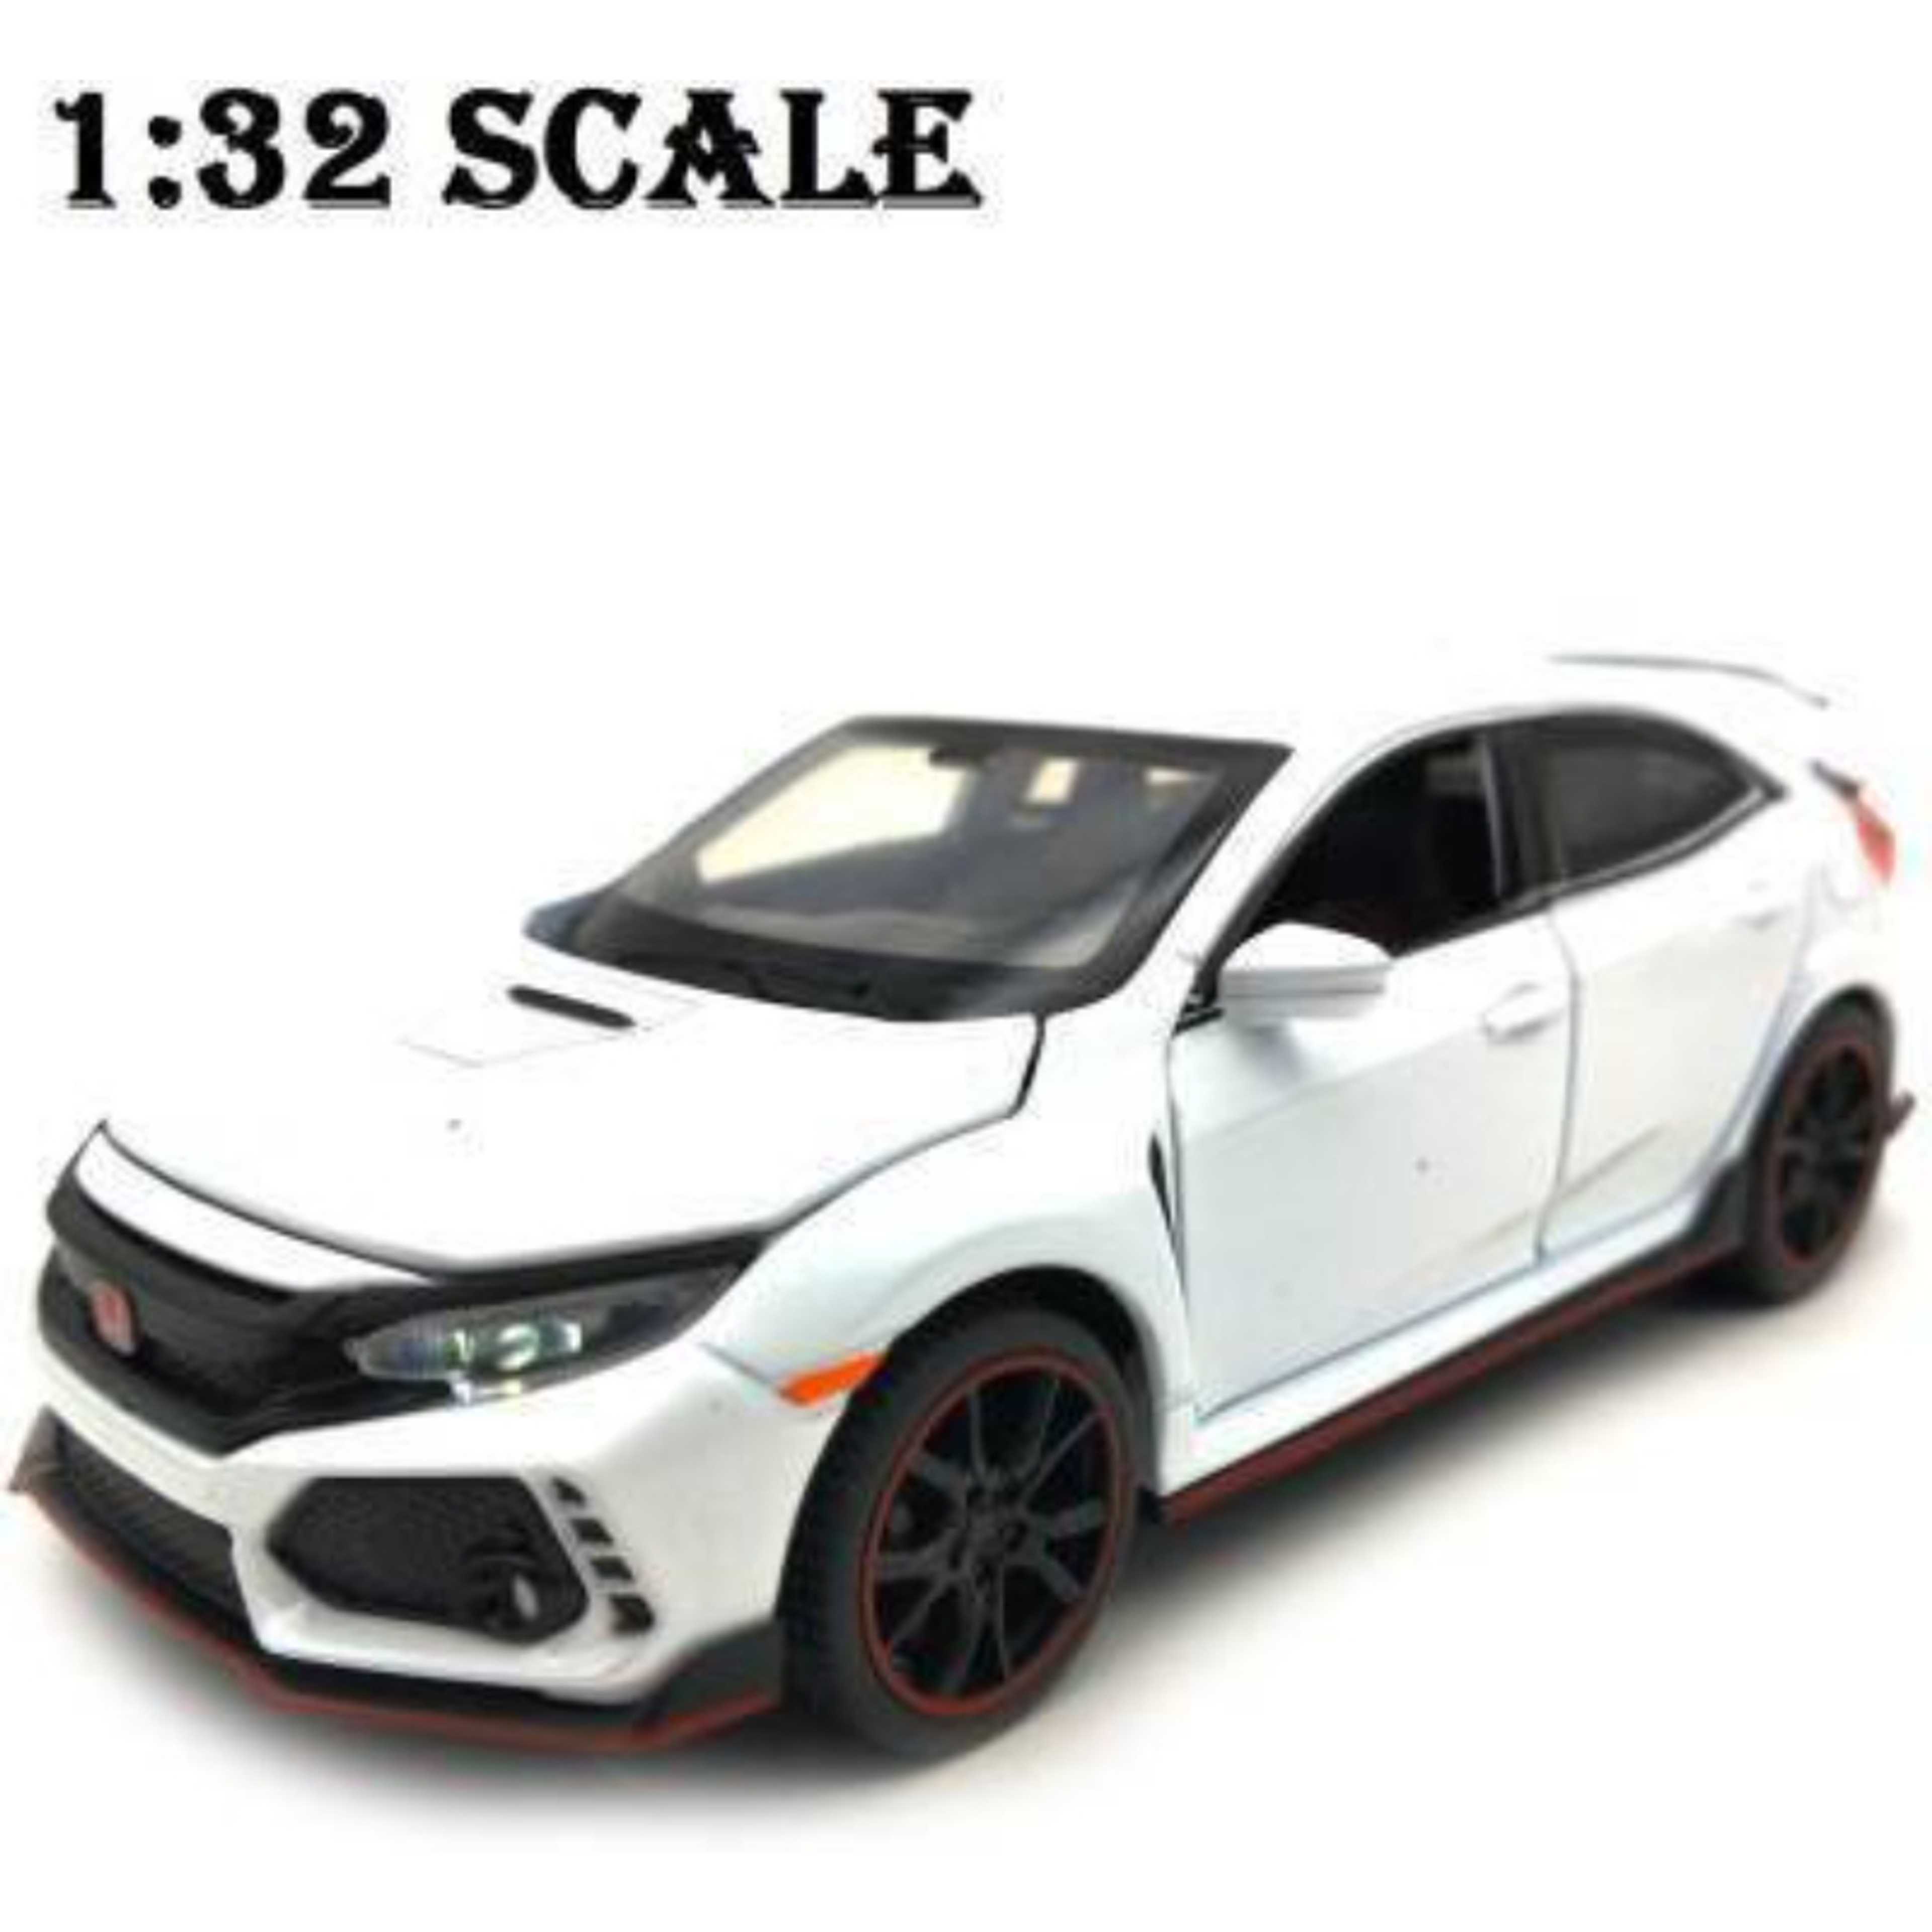 Honda Civic Type R Car Model Alloy 1:32 Diecast Cars Model Car Toy Vehicles Toys For Children Gifts